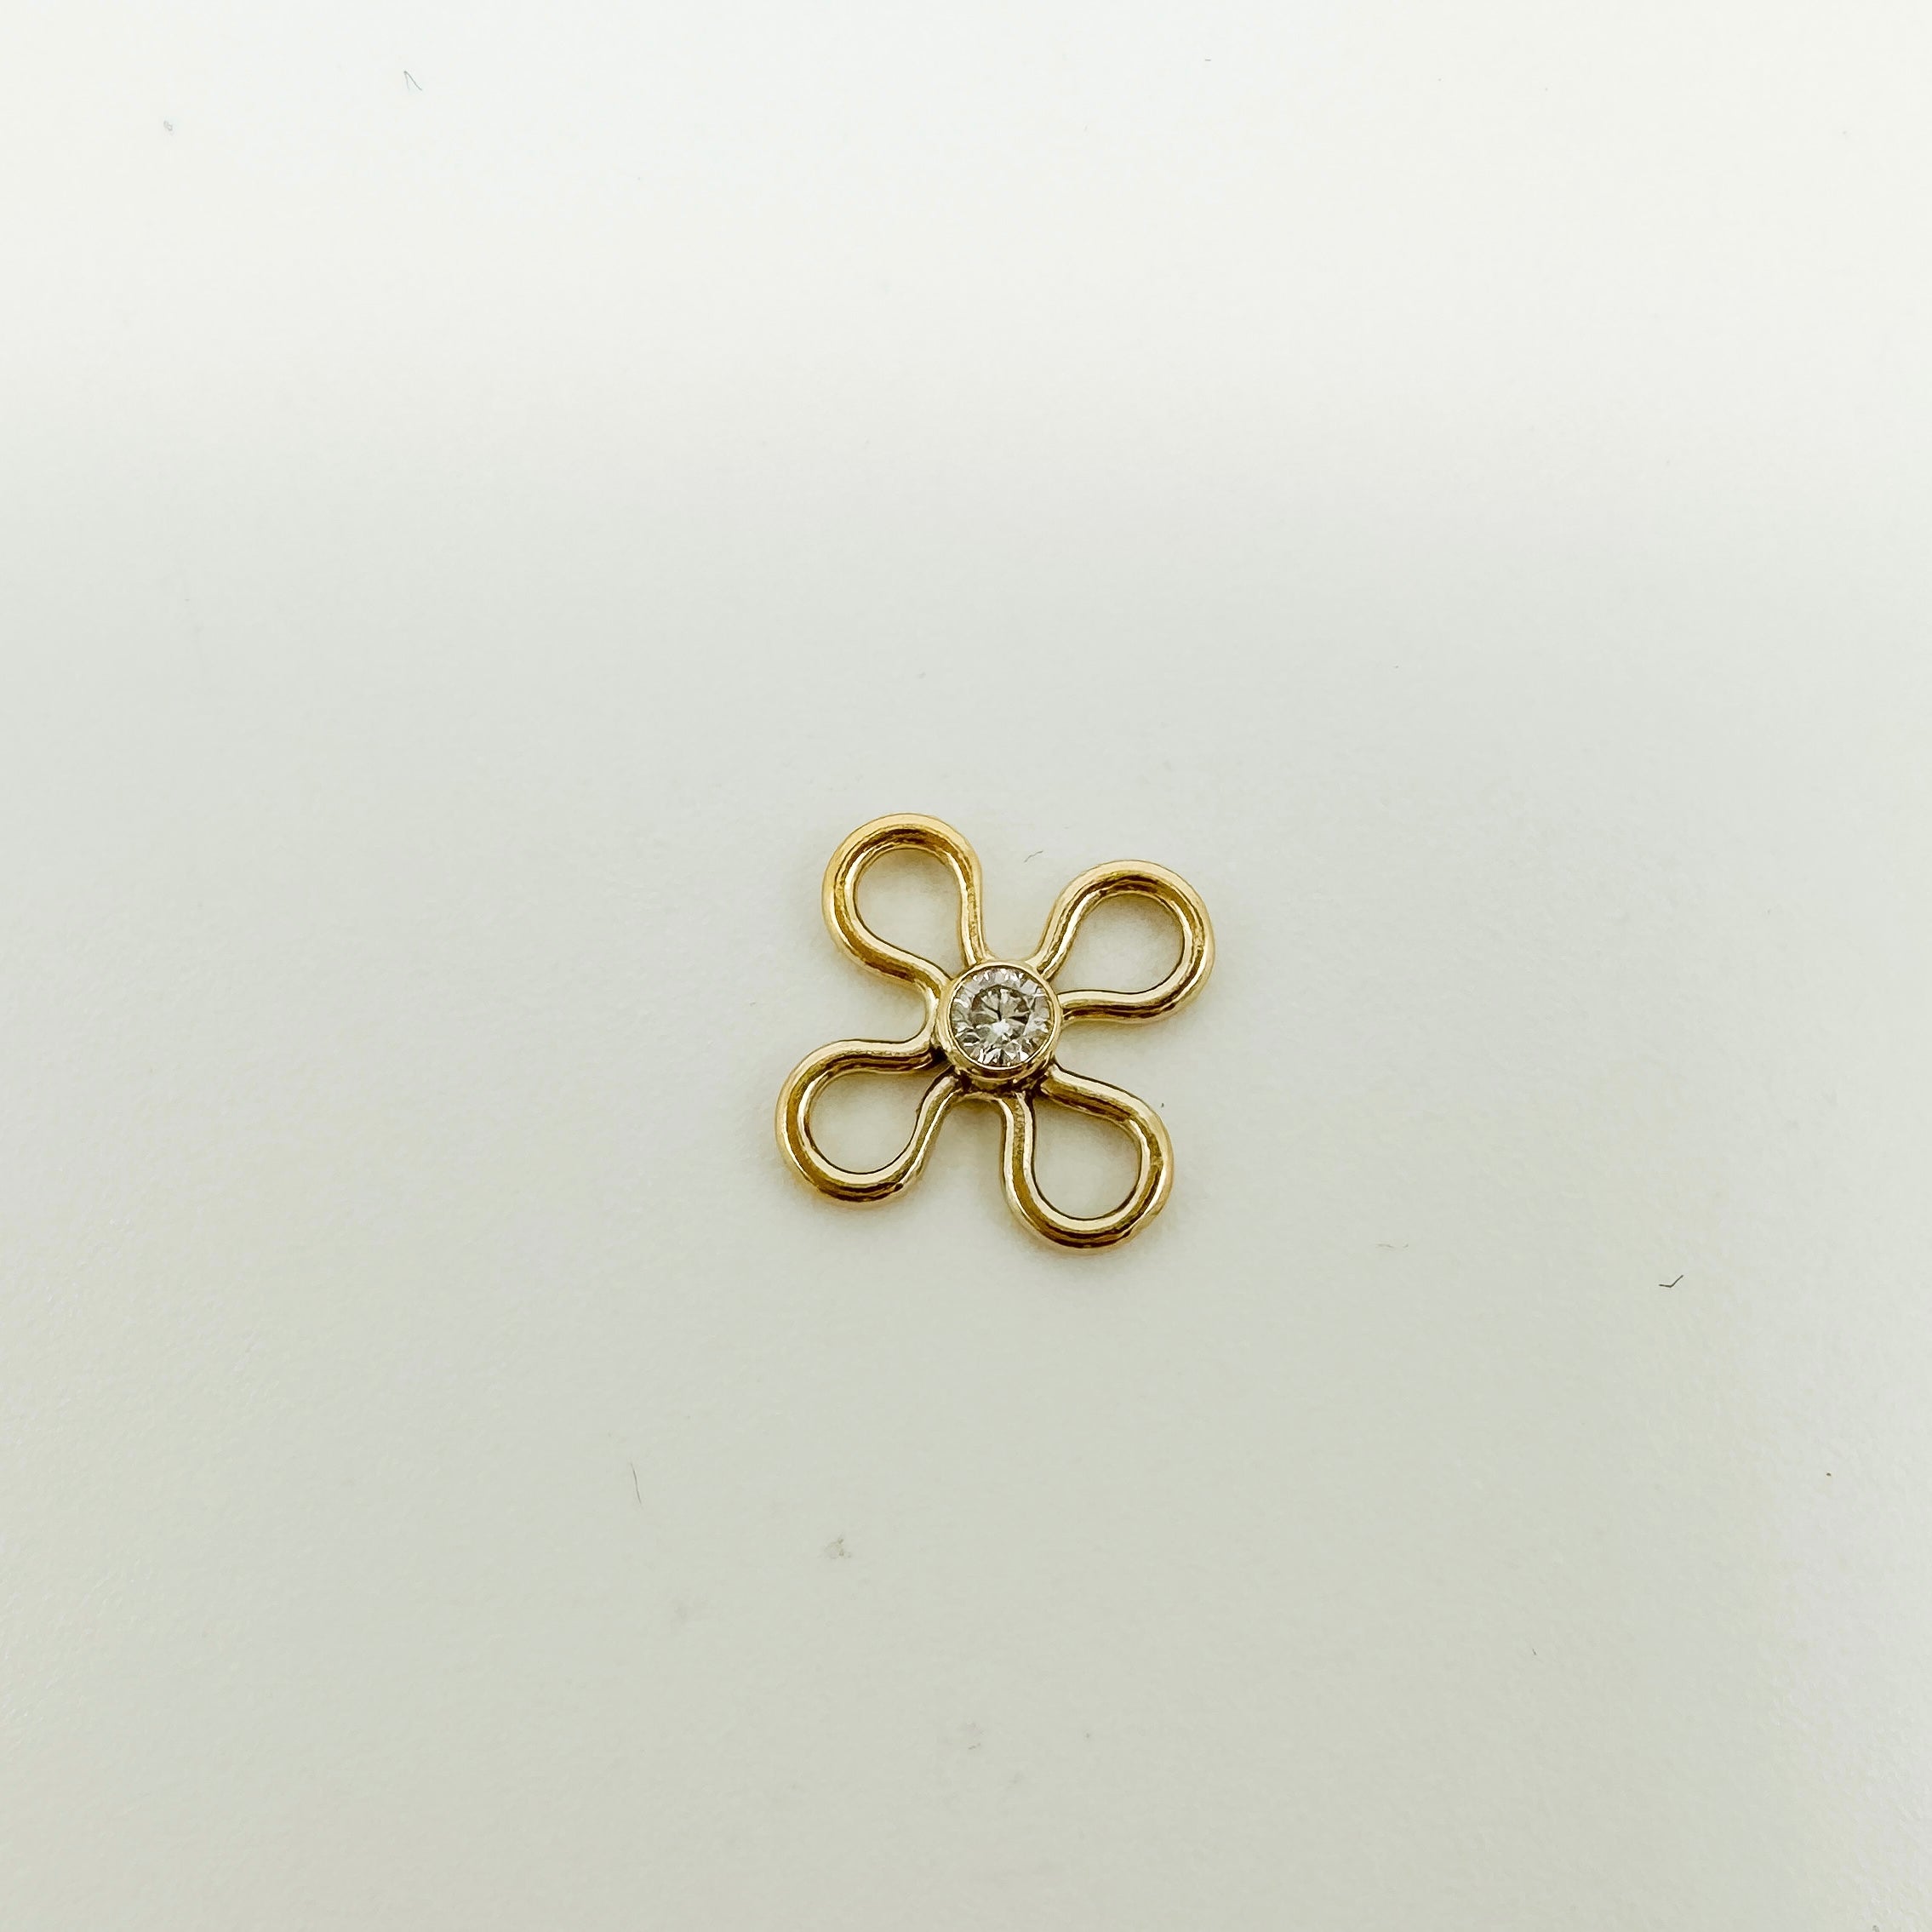 flower connector, cz flower connector, permanent jewelry connector